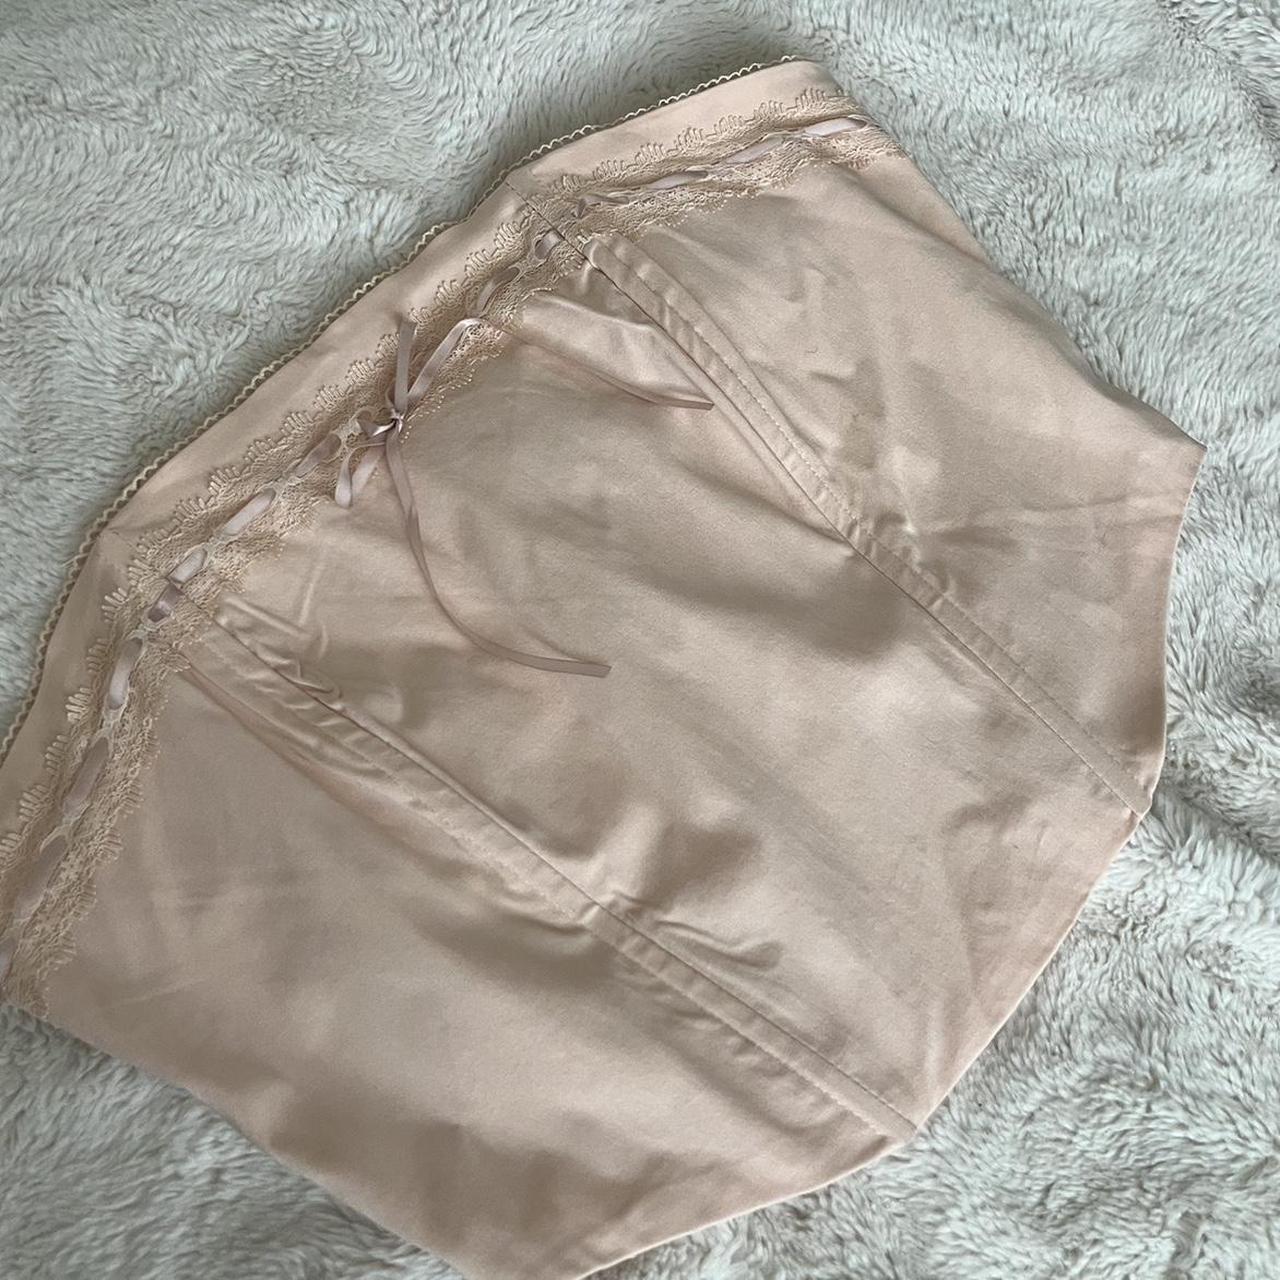 PEACHY PINK COQUETTE TOP SIZE M Comes with a... - Depop